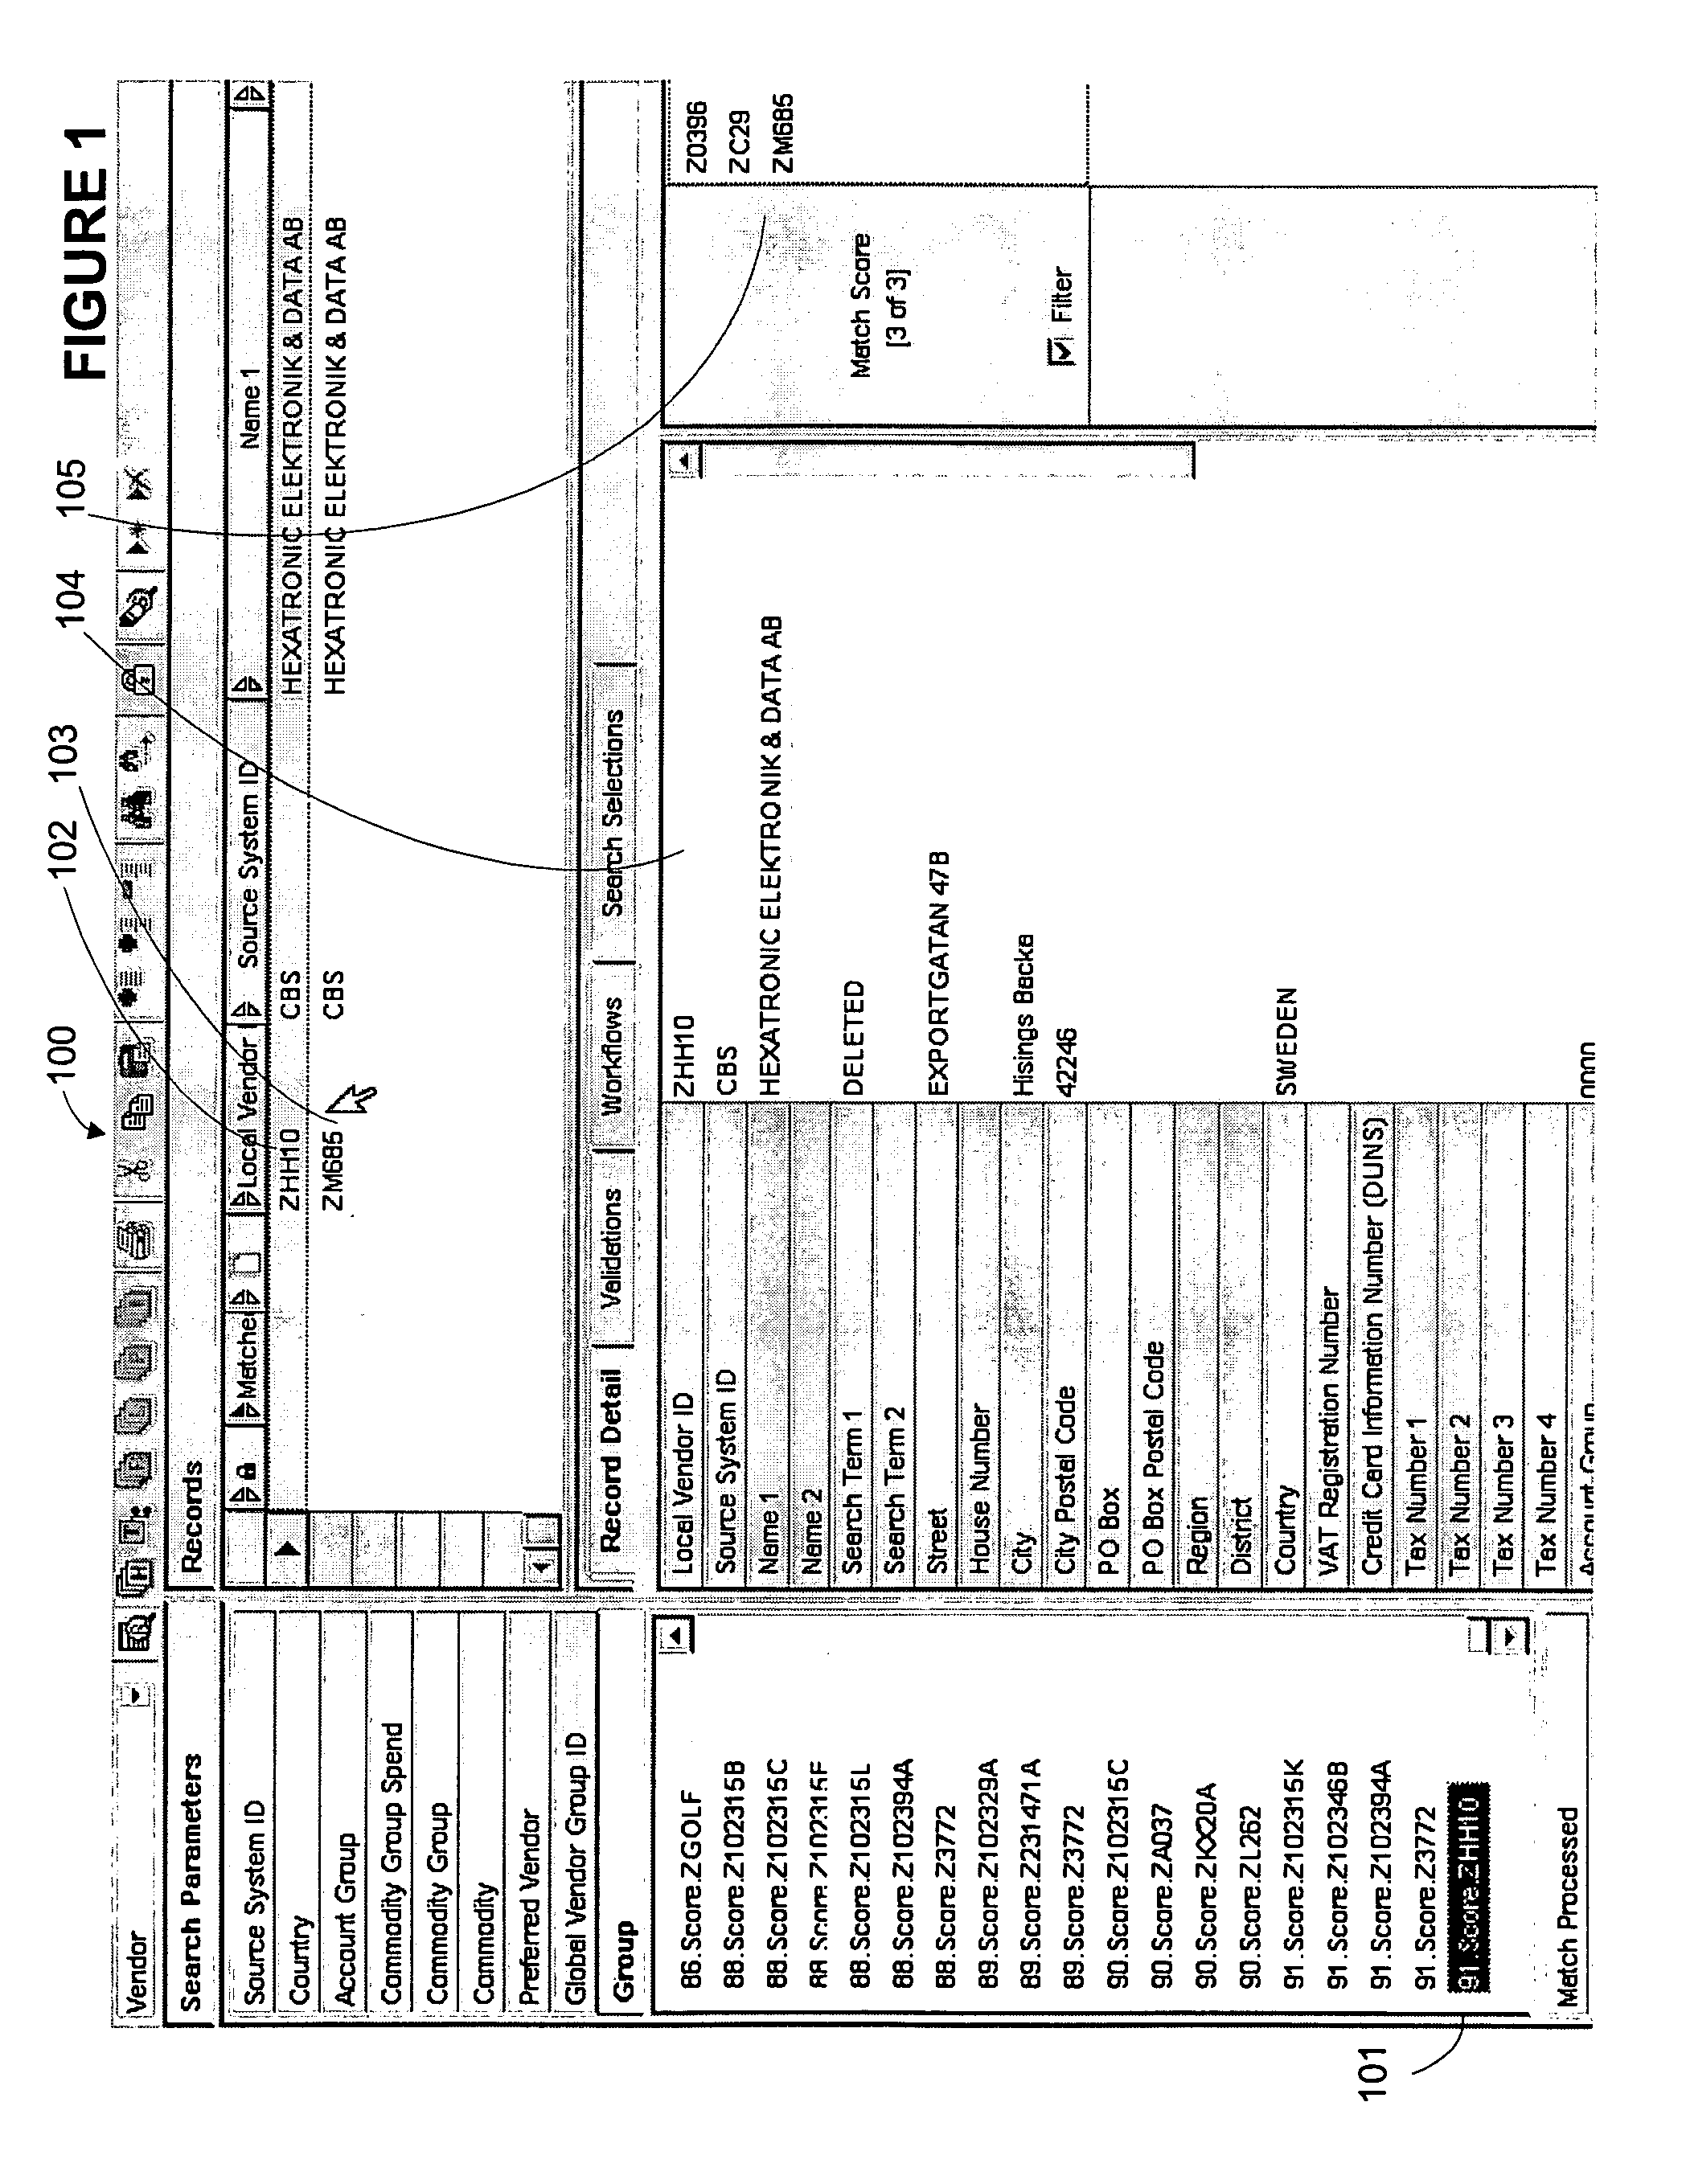 System and method for performing configurable matching of similar data in a data repository